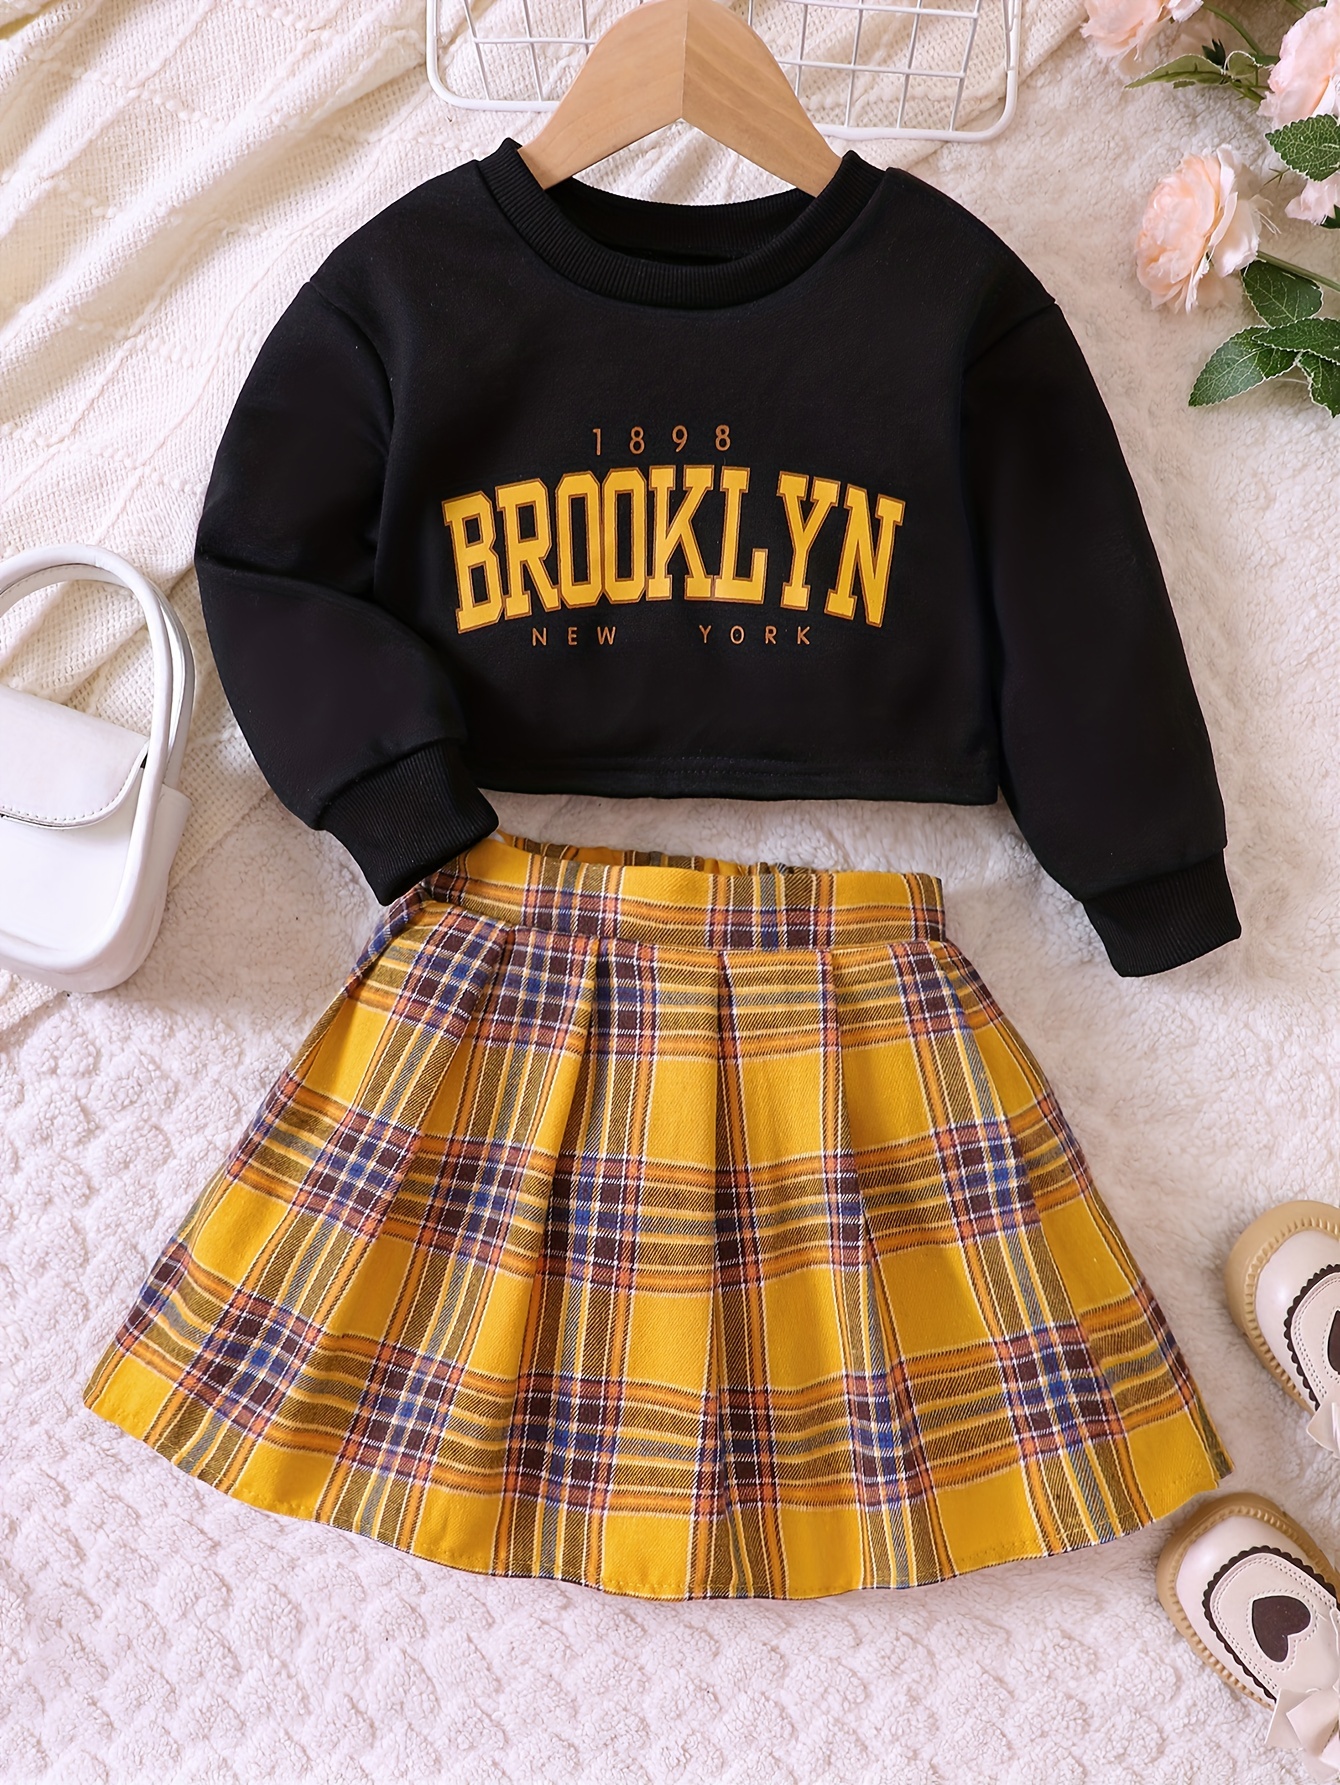 2pcs Girl's Preppy Style Outfit, Letter Print Sweatshirt & Pleated Skirt  Set, Toddler Kid's Clothes For Spring Autumn